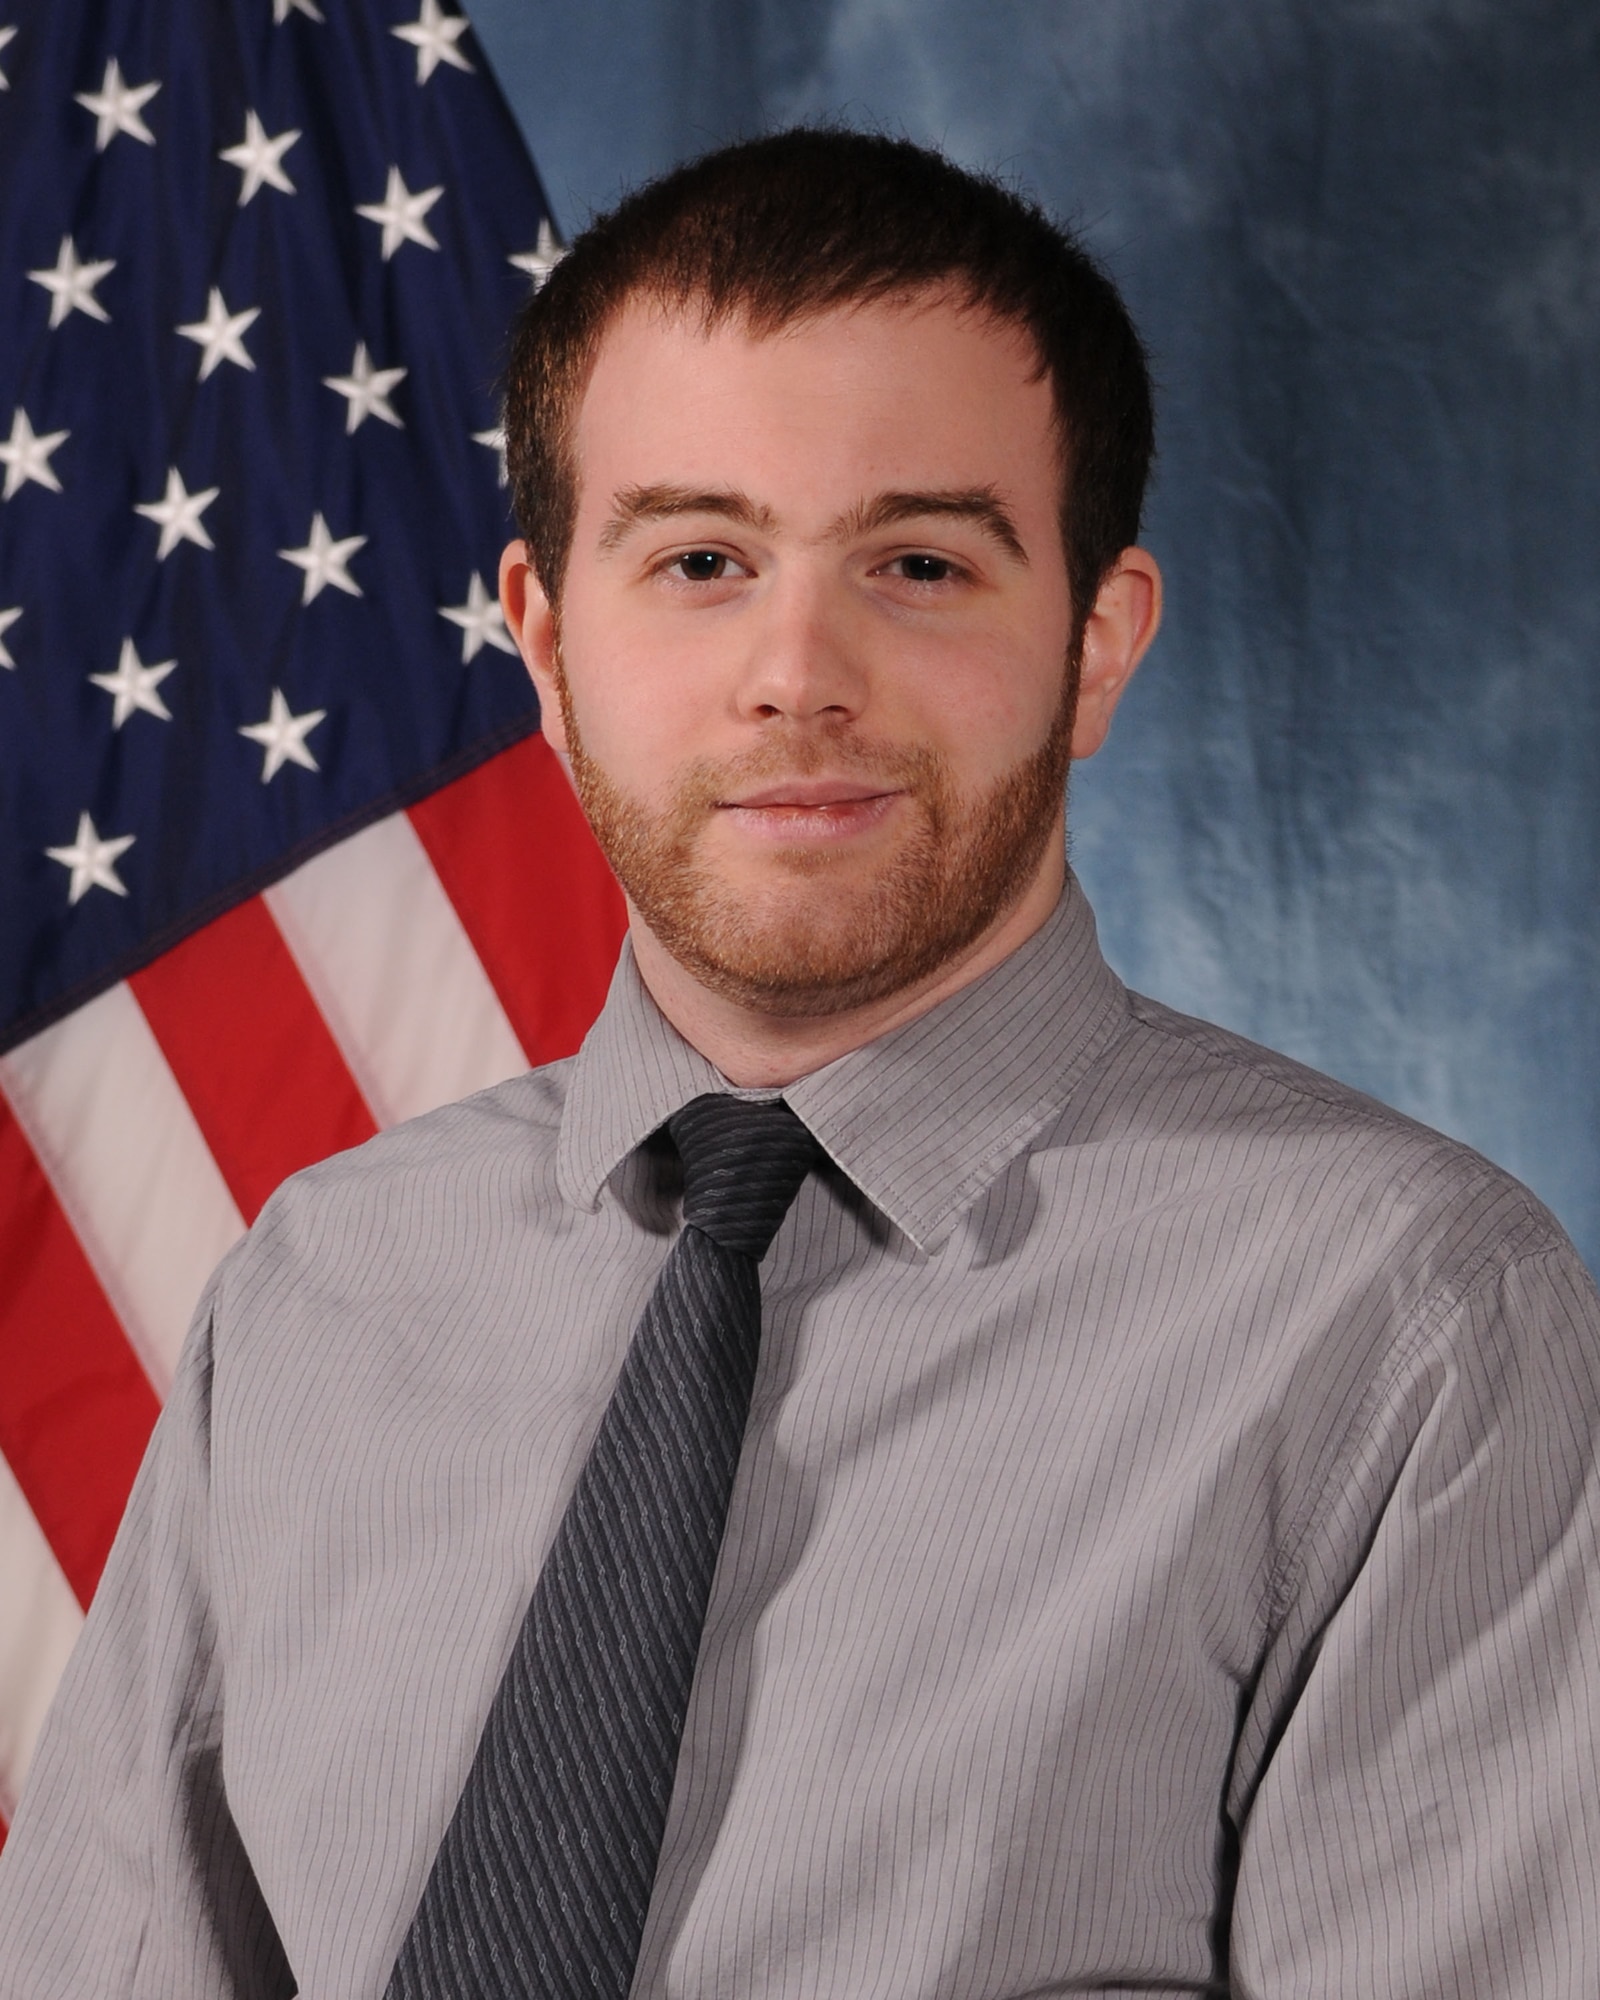 Air Force civilian employee Thomas Fay chose the Air Force Institute of Technology to complete his graduate and doctoral education because of its unique position as an Air Force graduate research institute.